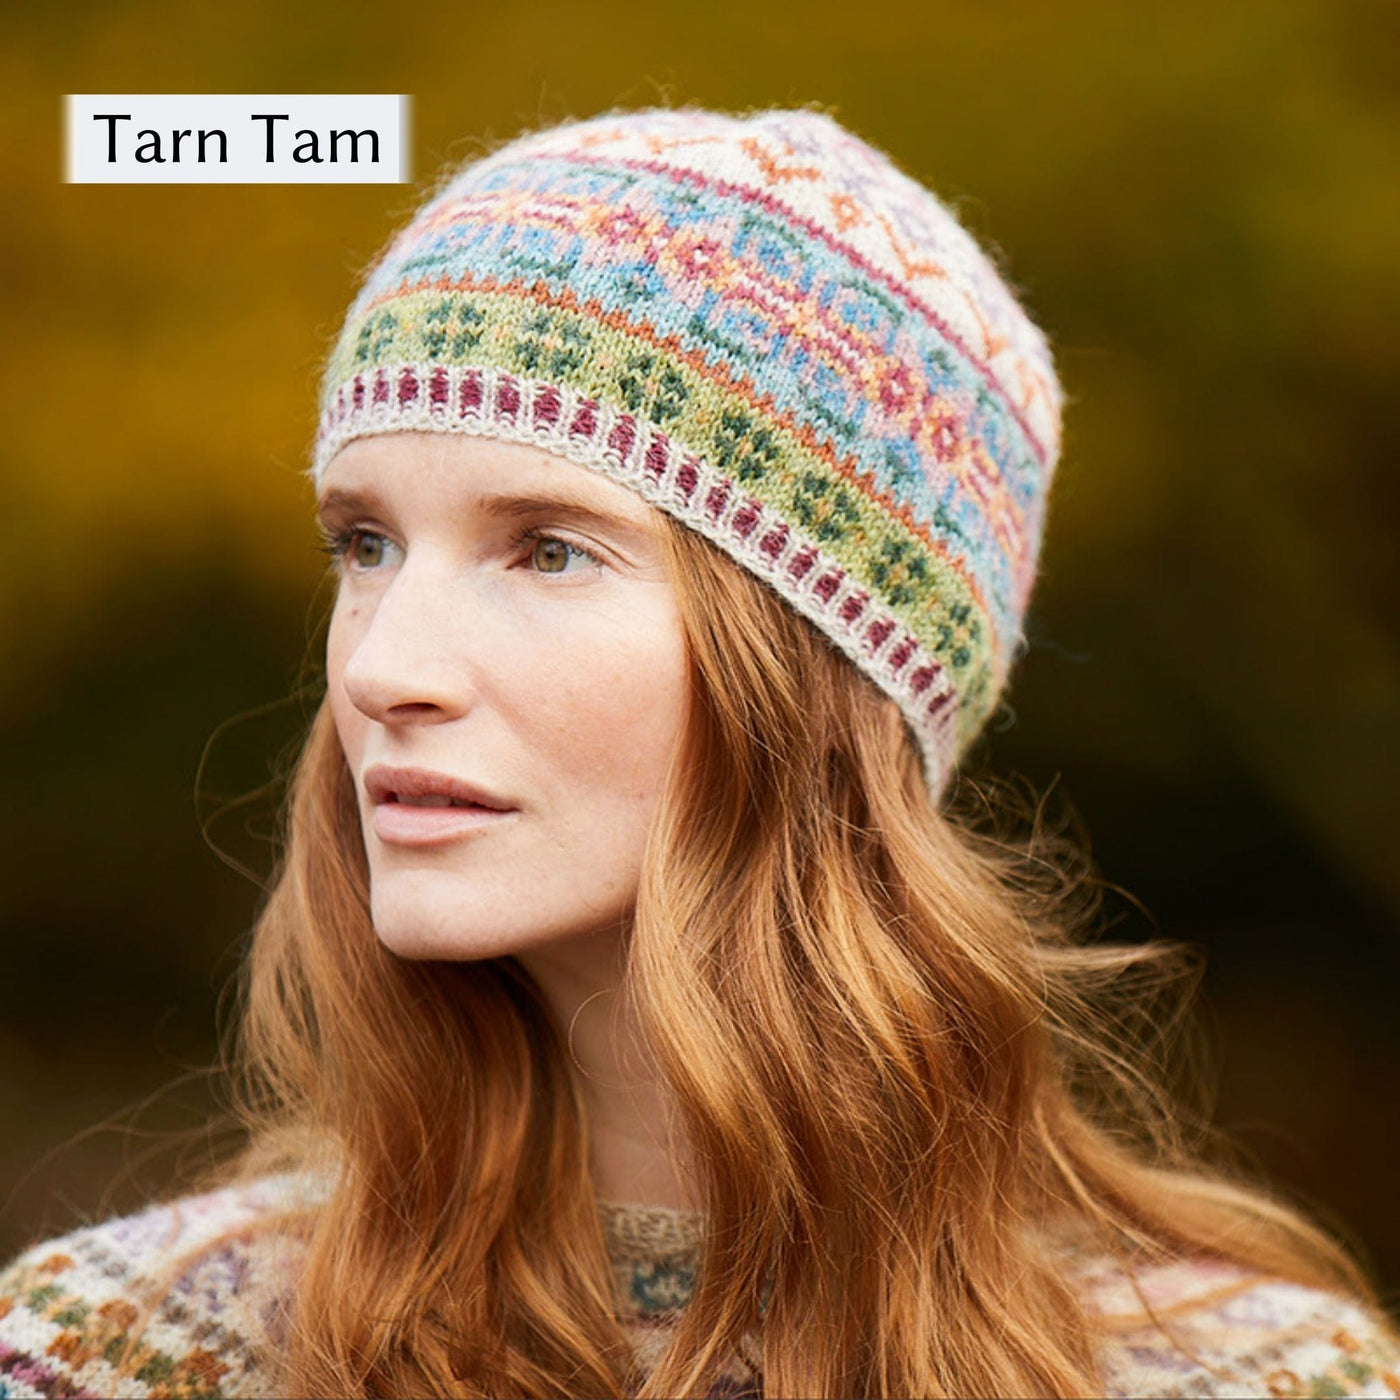 Model wearing Tarn Tam hat, a design from Cumbria Book by Mare Wallin color